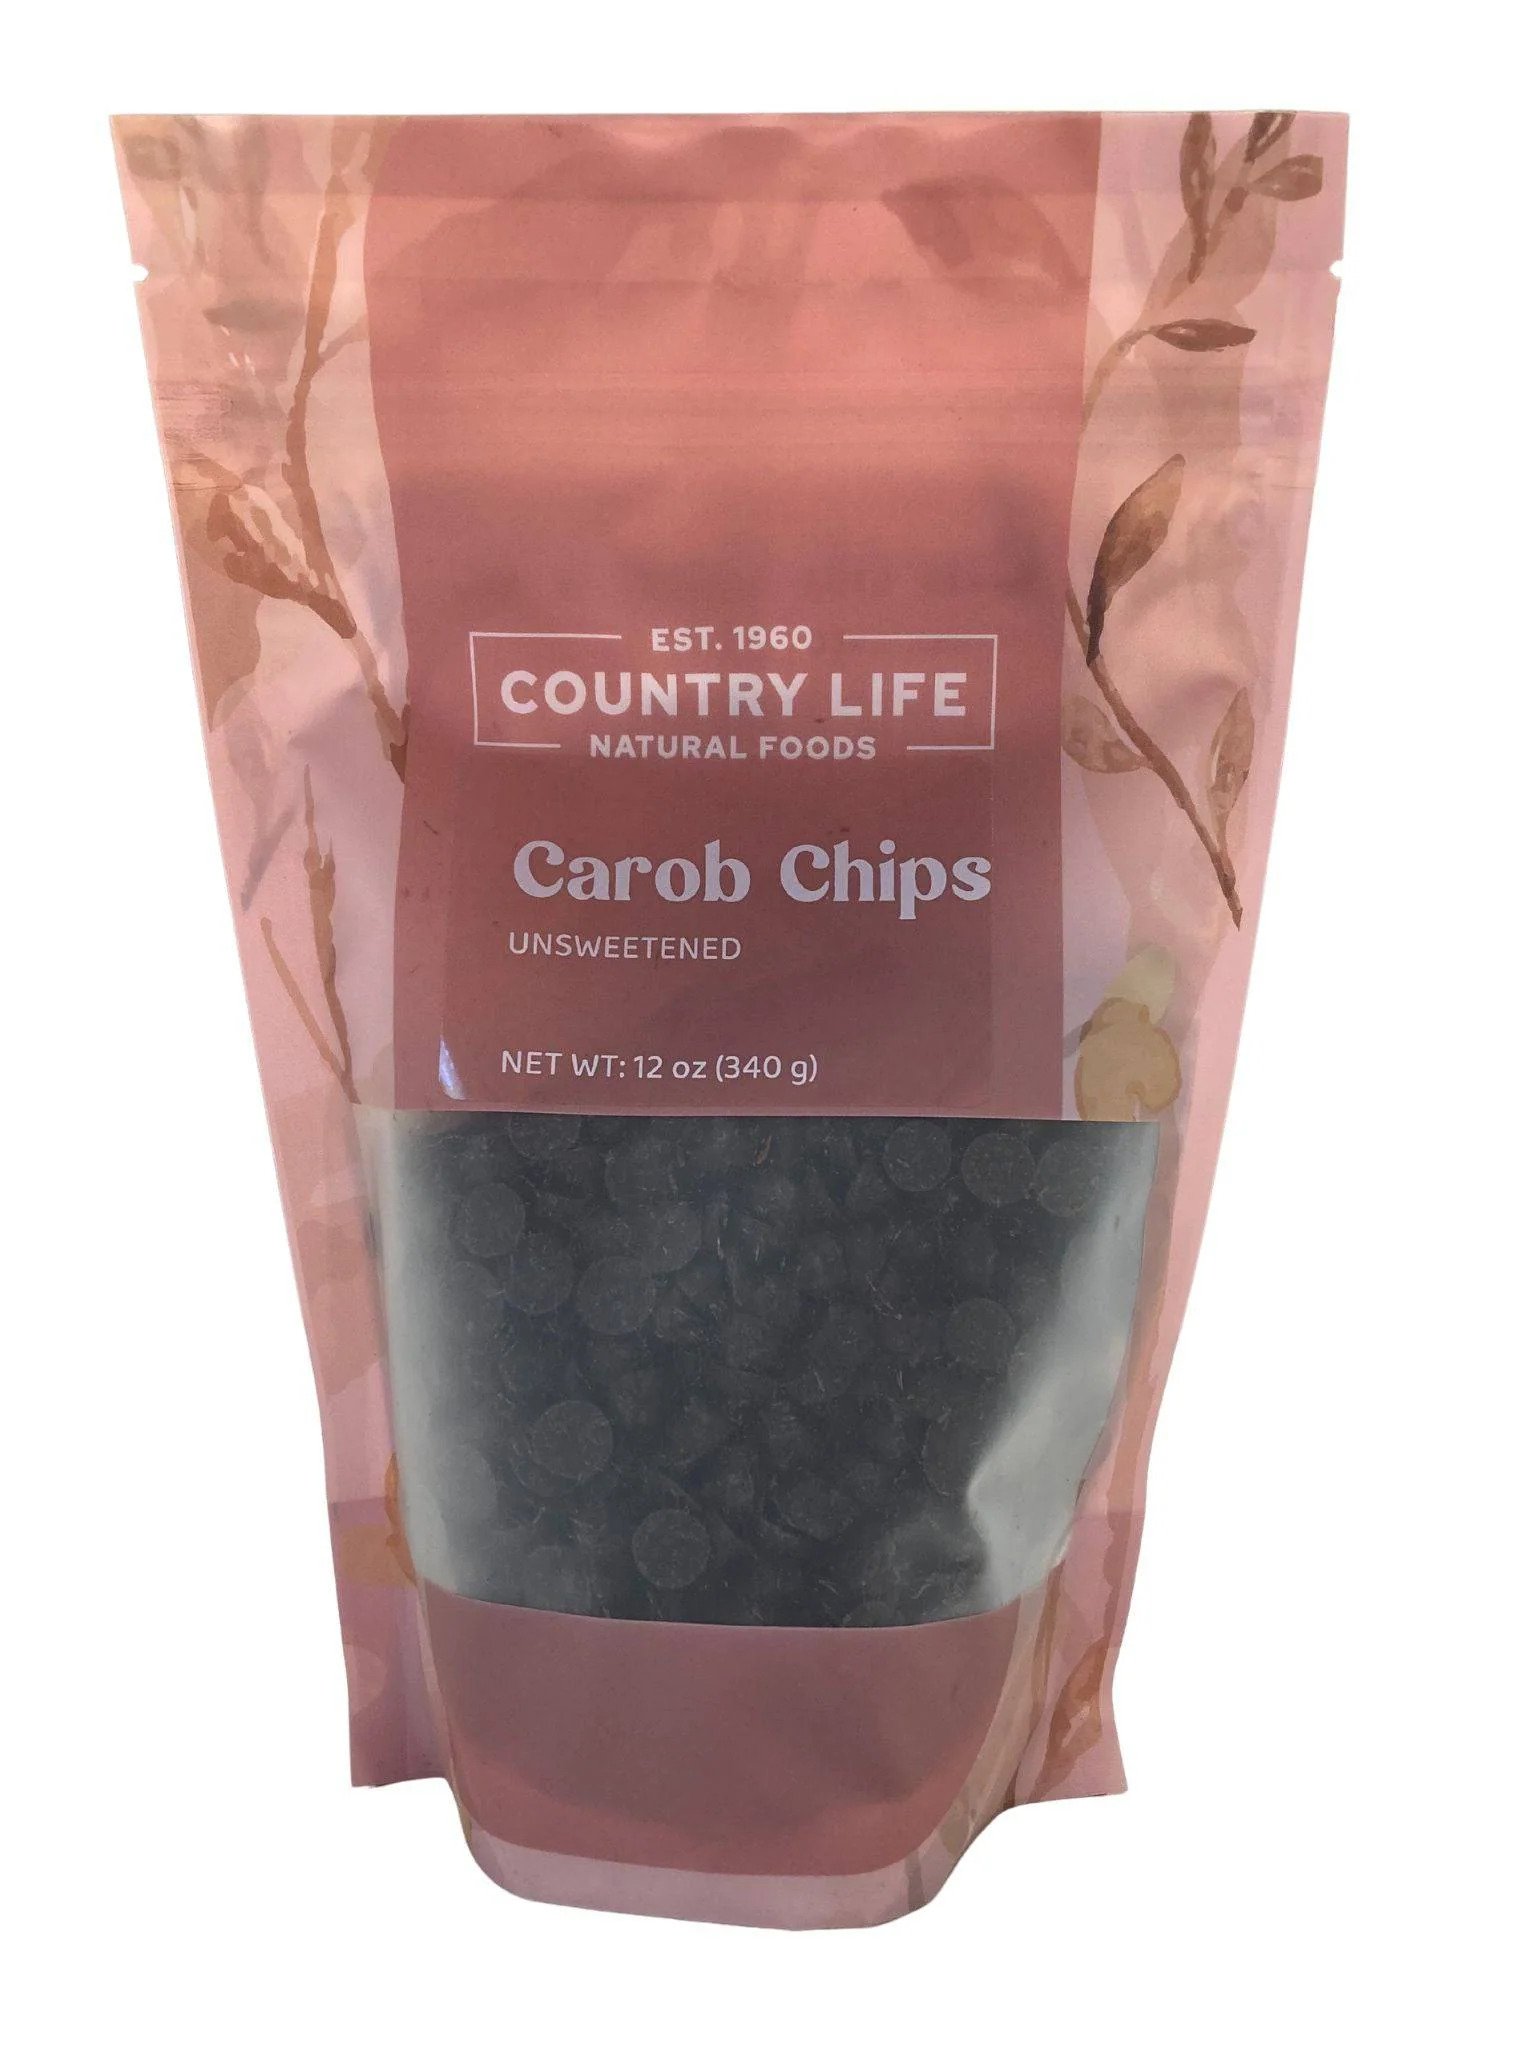 UNSWEETENDED CAROB CHIPS